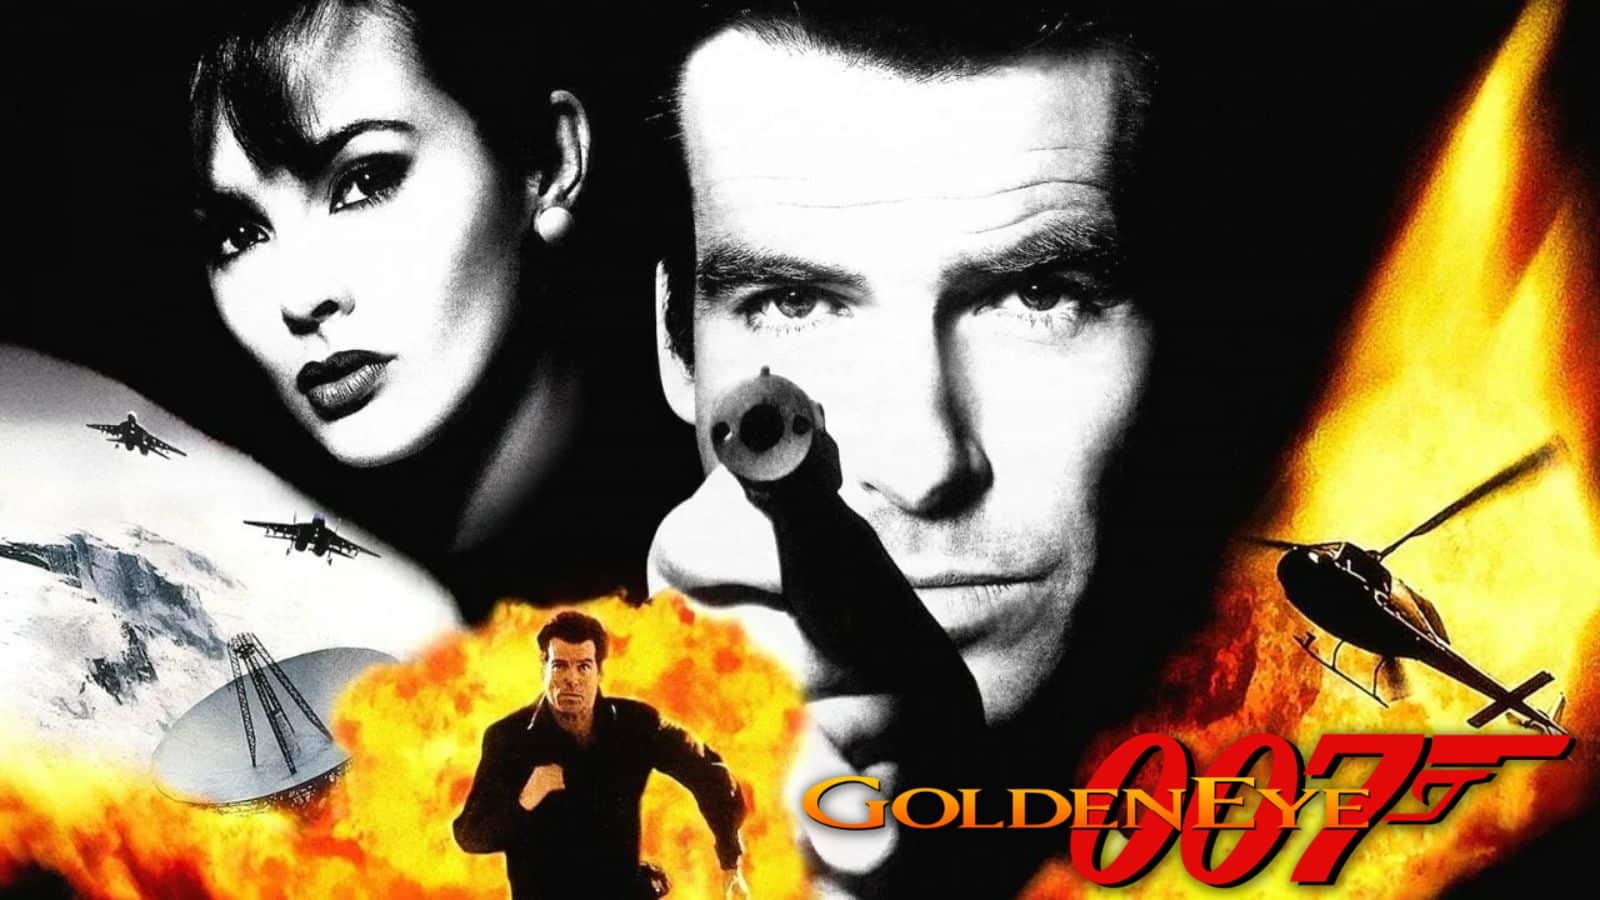 GoldenEye 007 Remaster “Coming Soon” for Nintendo Switch and Xbox